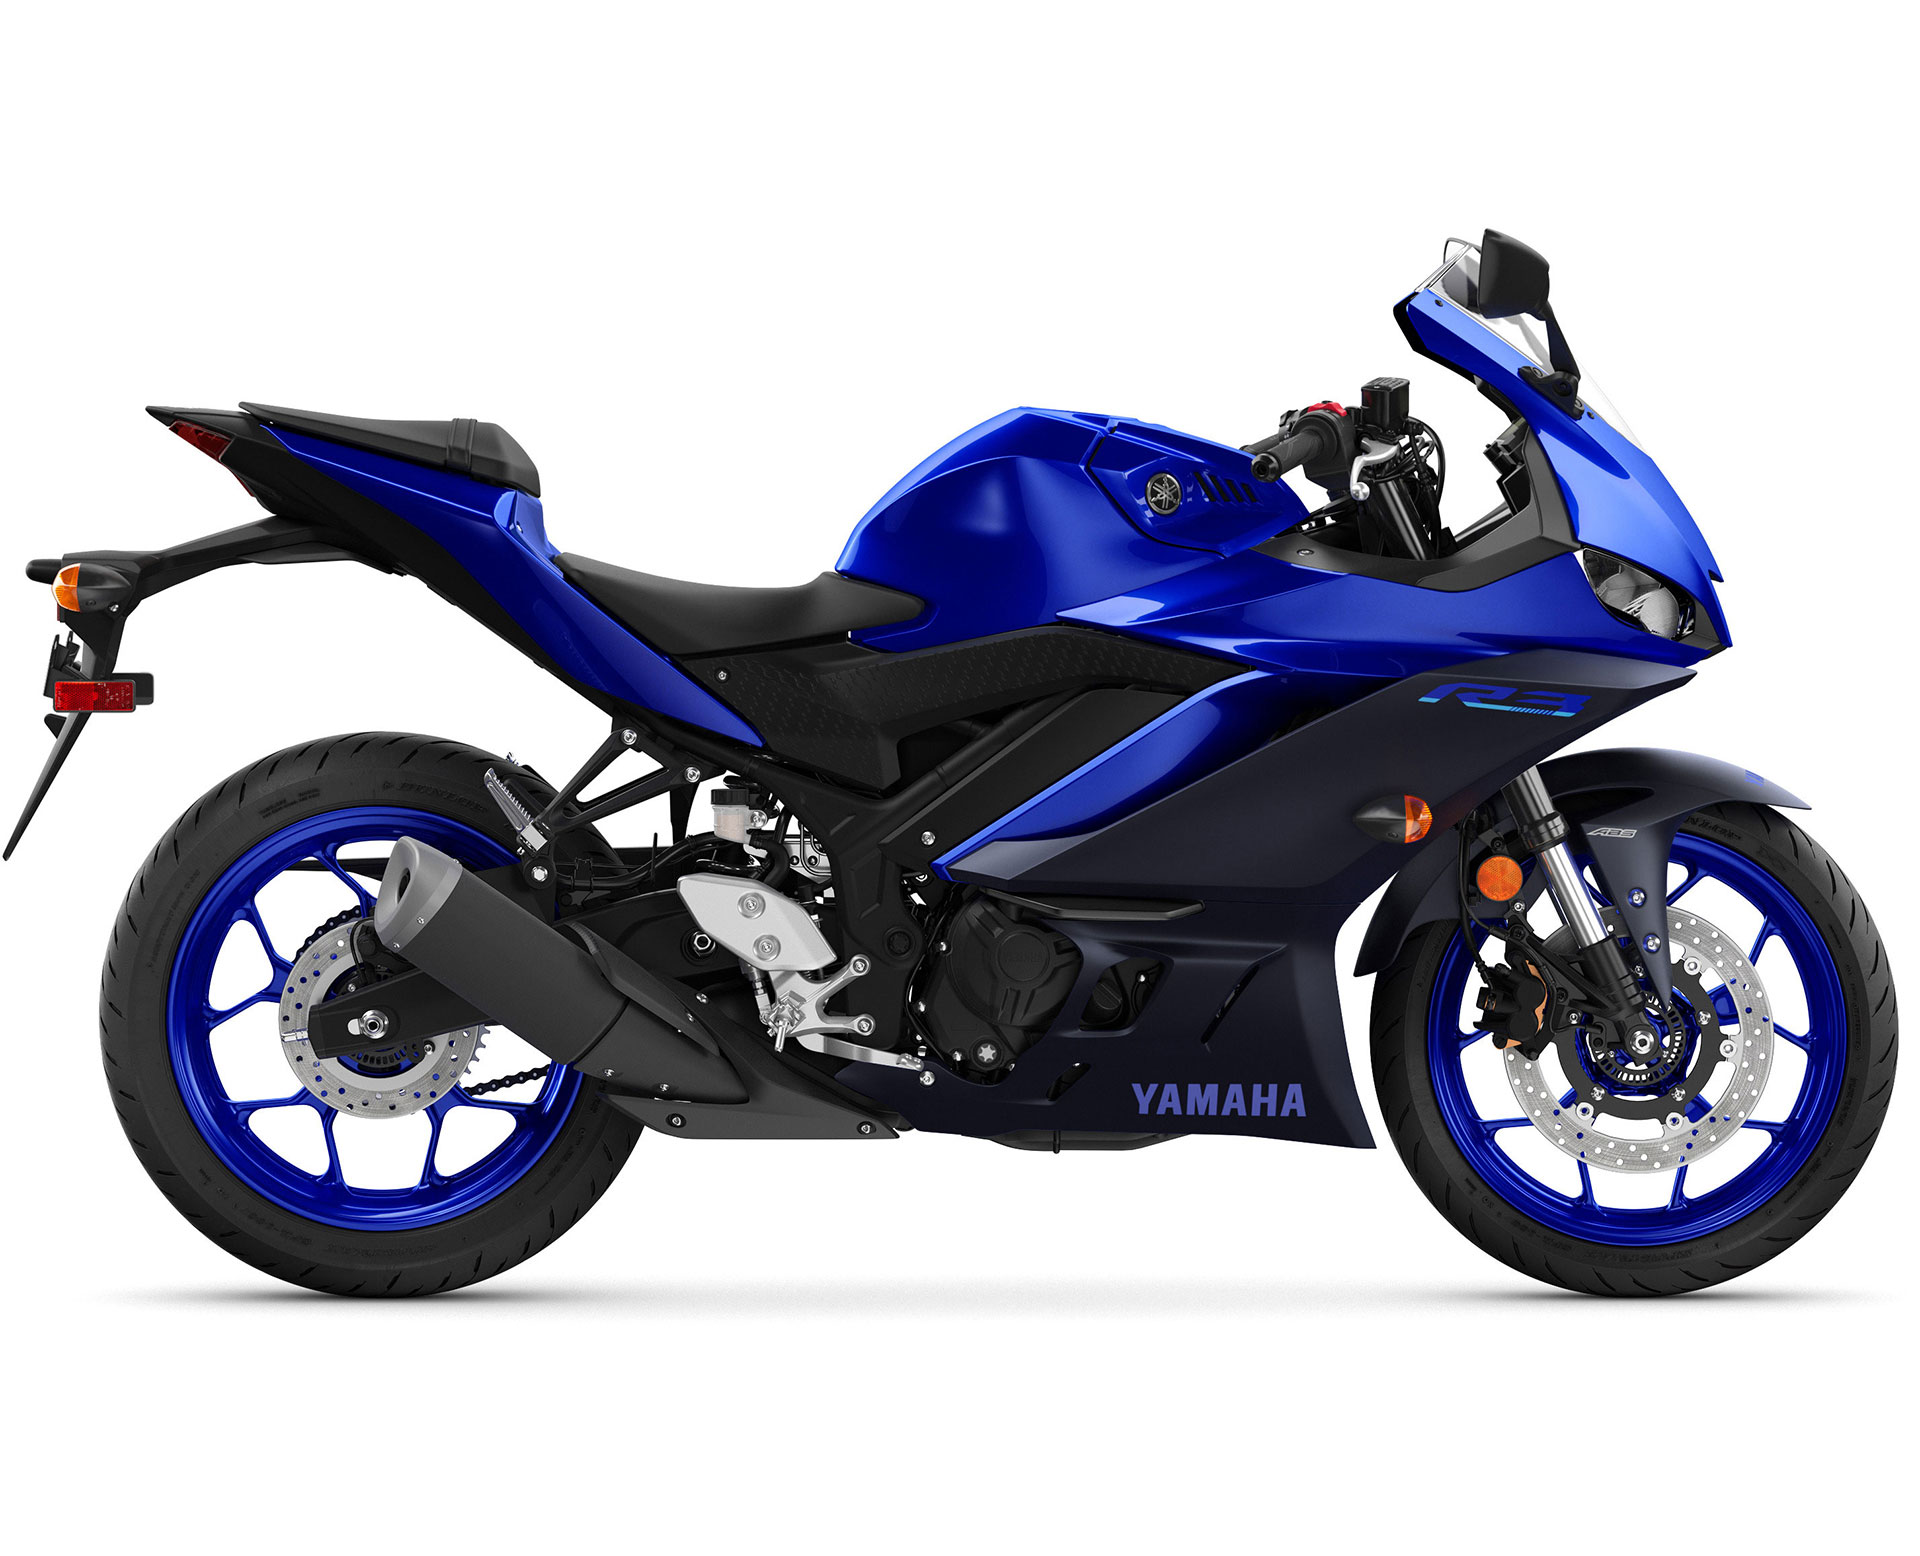 Thumbnail of your customized YZF-R3 2023